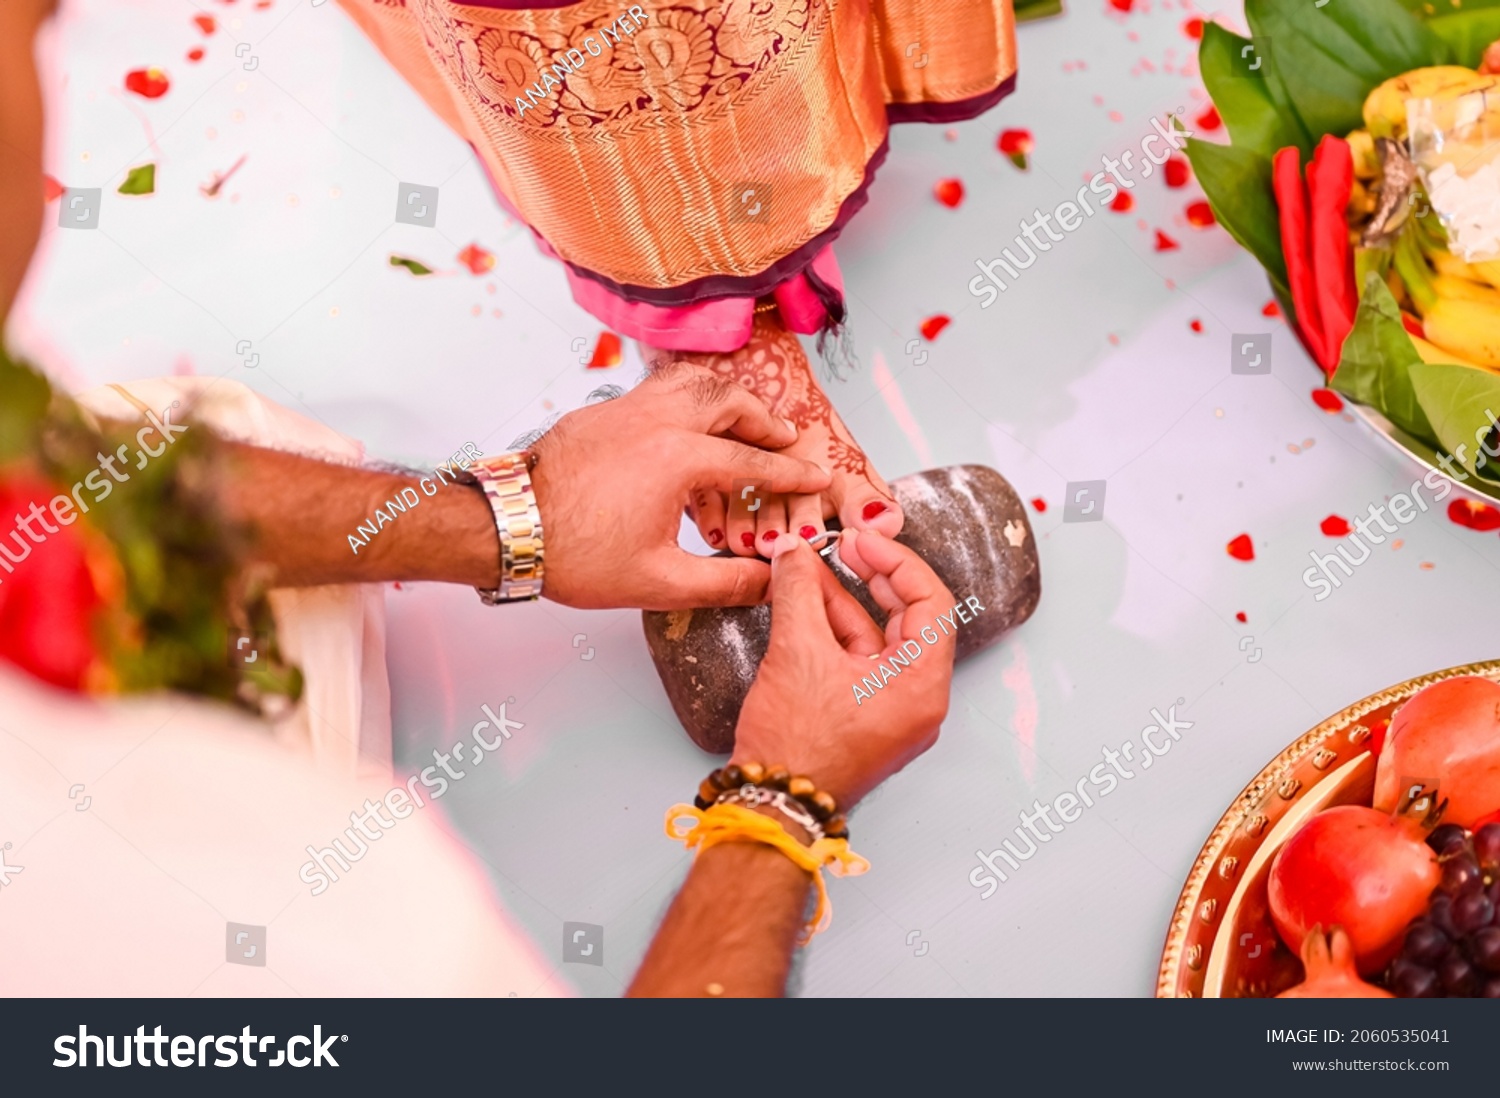 610 Tamil wedding rituals Images, Stock ...